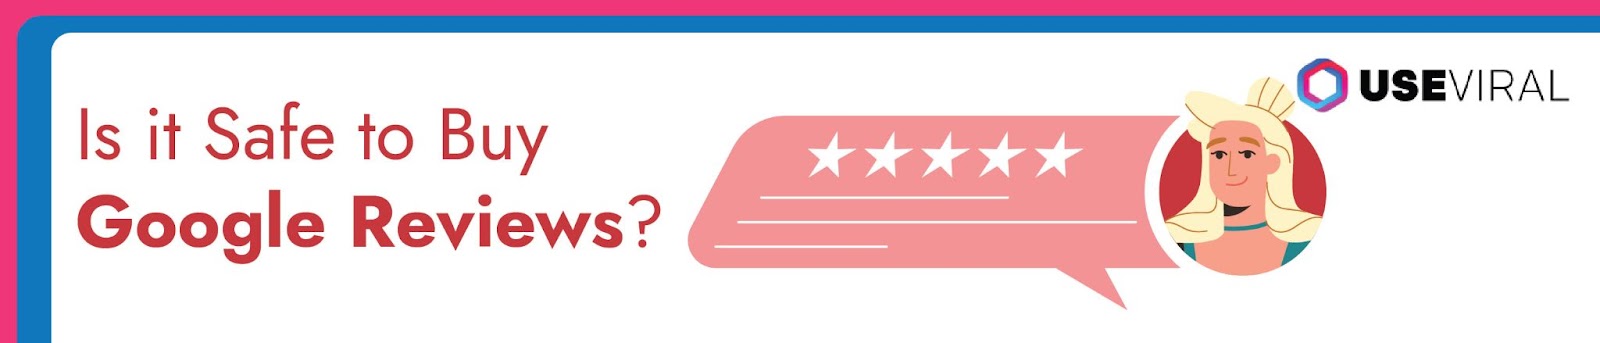 Is it Safe to Buy Google Reviews?